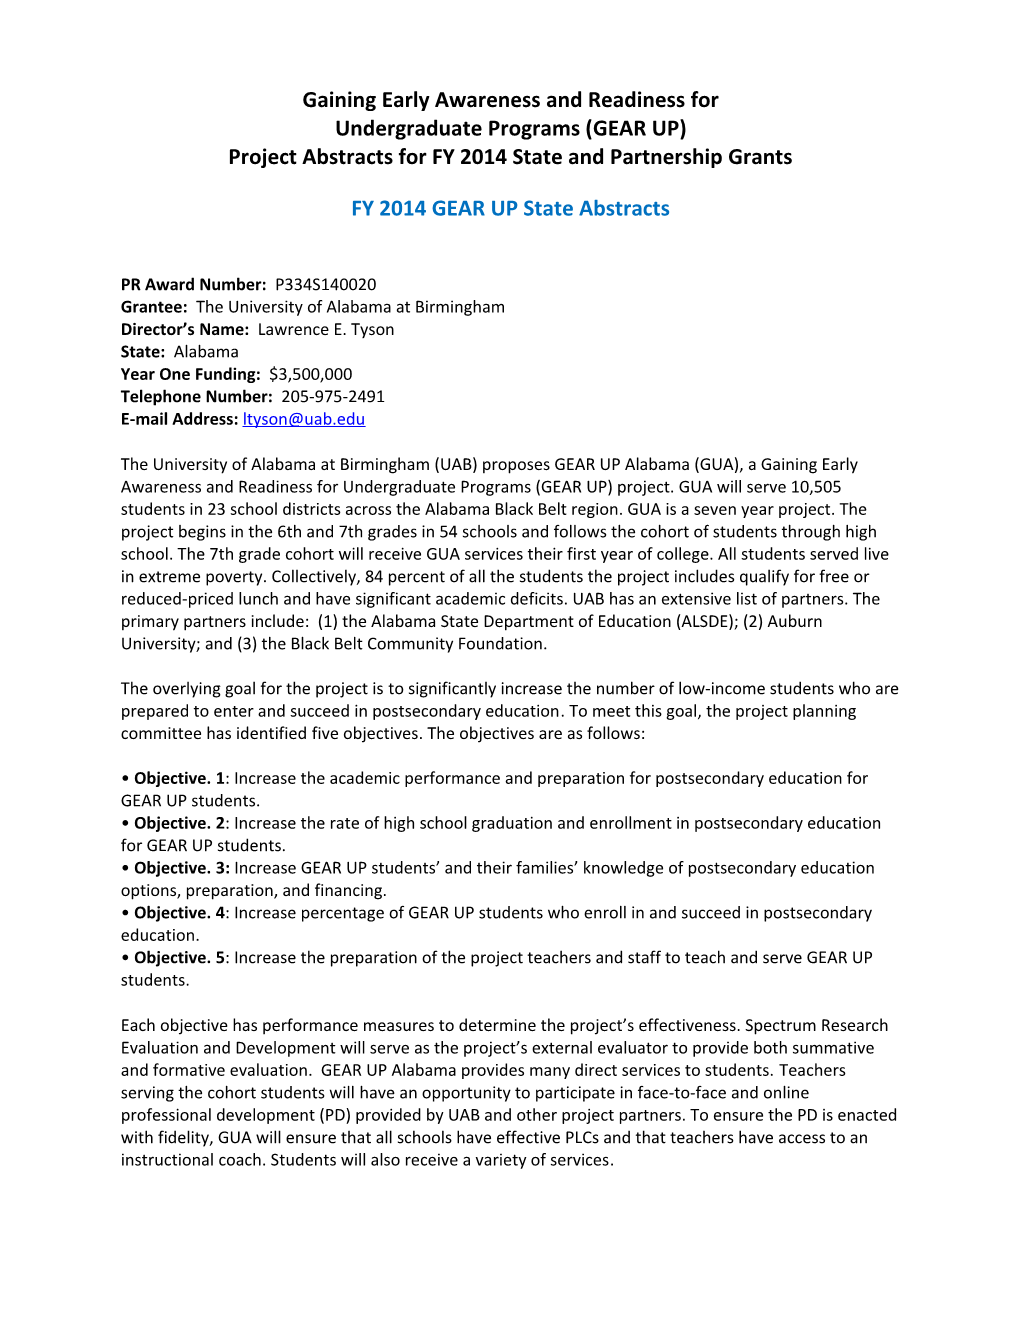 FY 2014 Project Abstracts for State and Partnership Grants Under the GEAR up Program (MS Word)